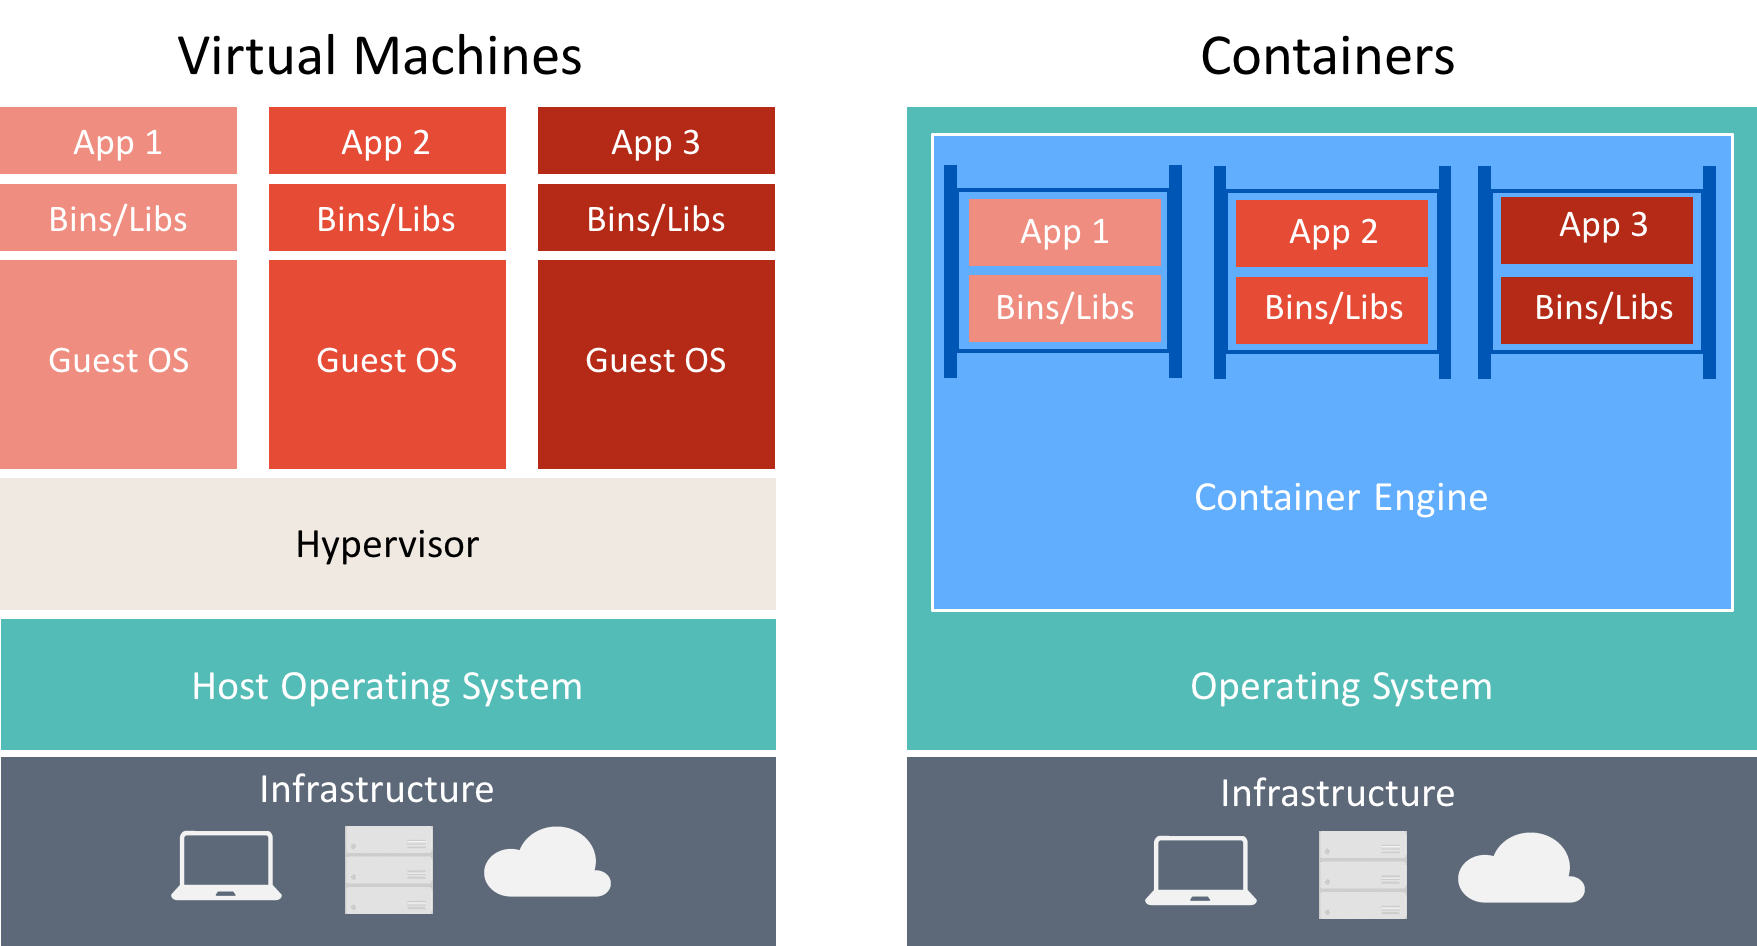 Diagram shows a comparison between Virtual Machines and Containers, where virtual machines have three apps each siloed on a guest O S, with a hypervisor and a host O S, and the containers have three apps hosted in a container engine on a single OS.